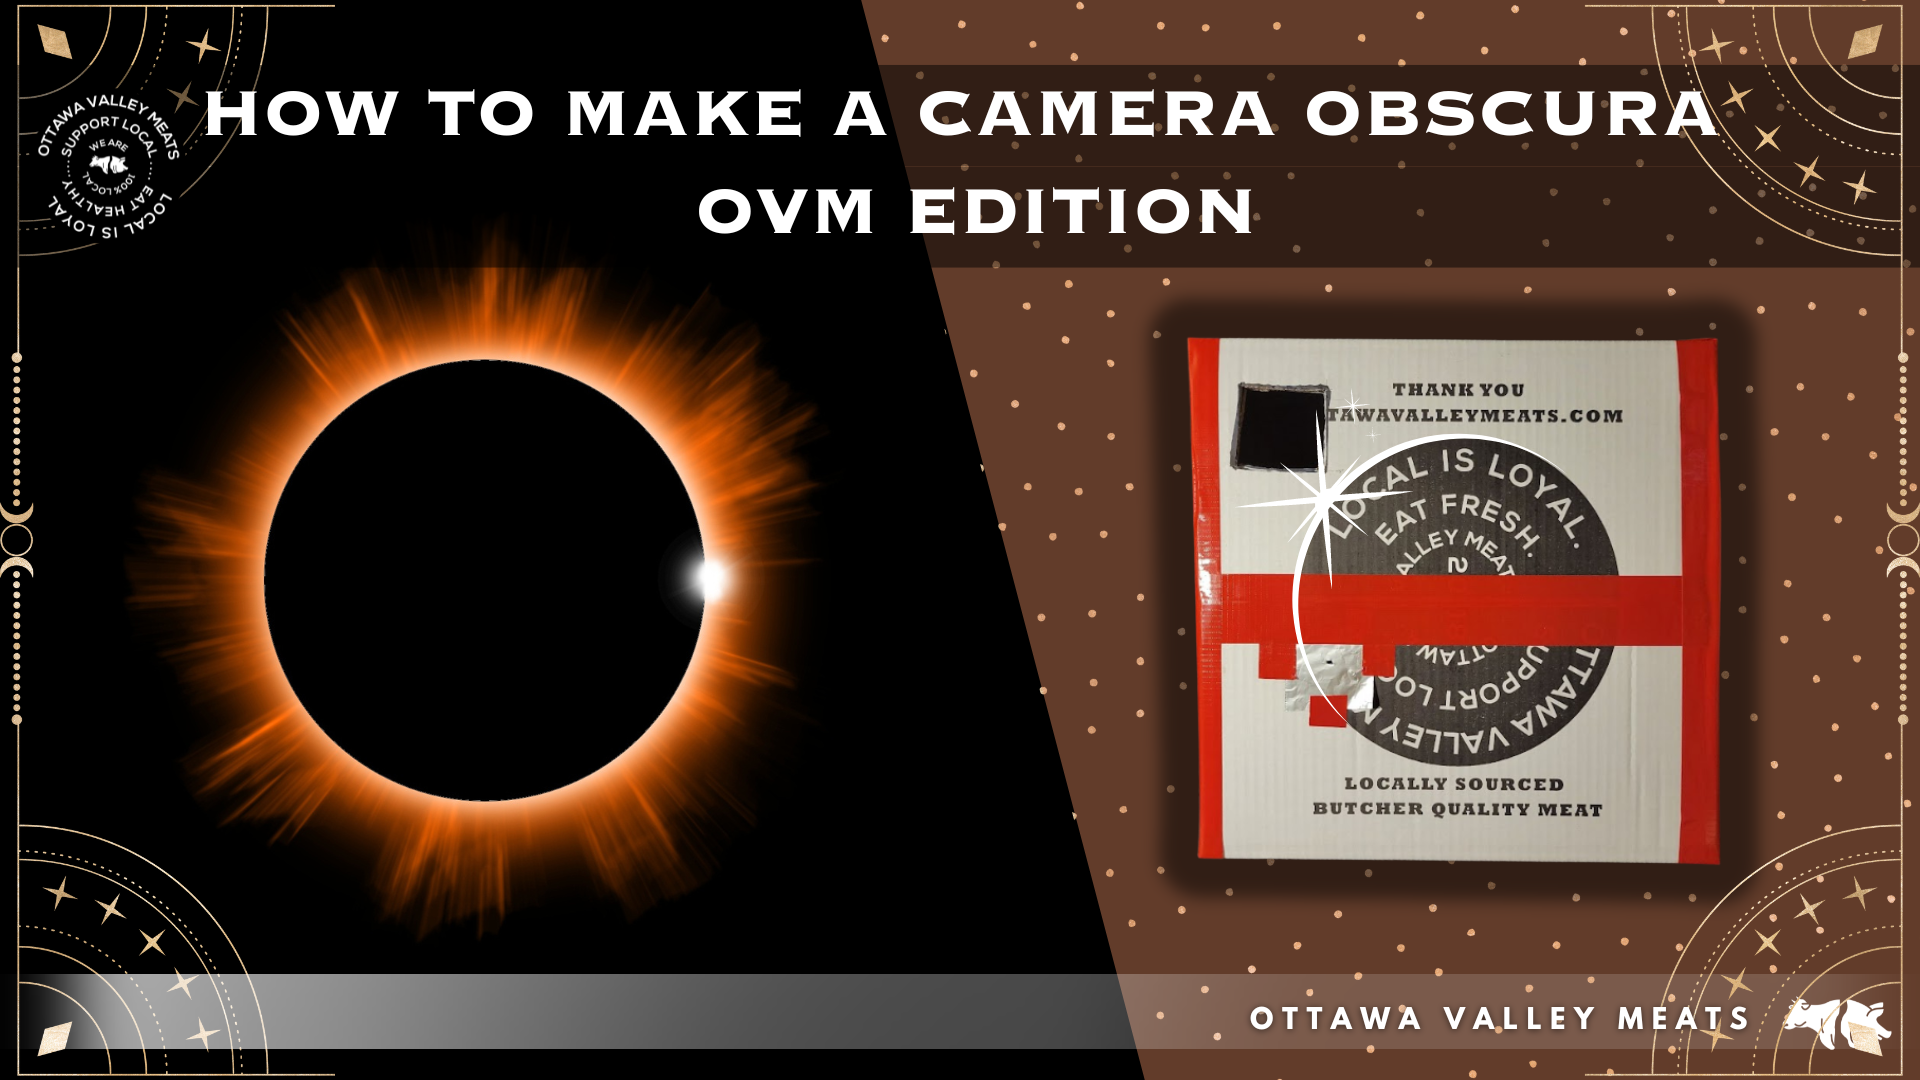 How To Make A Camera Obscura - OVM BOX EDITION